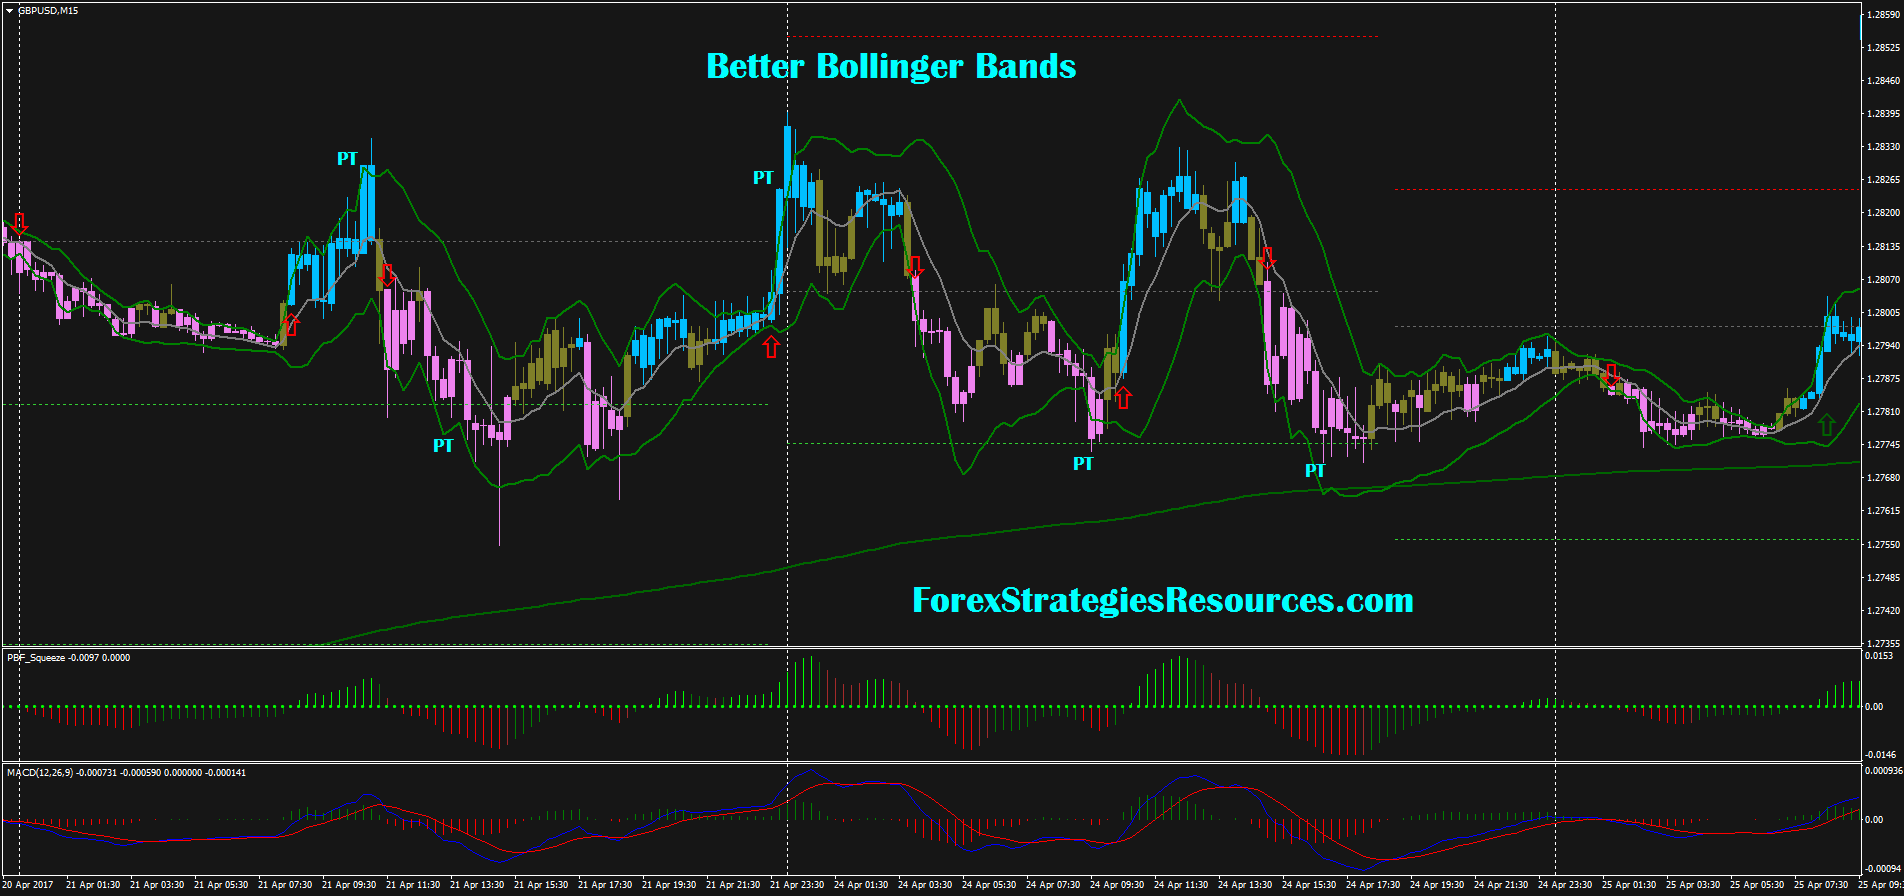 Bollinger band crossover indicator forex forex non farm payroll dec 4 2022 forecast